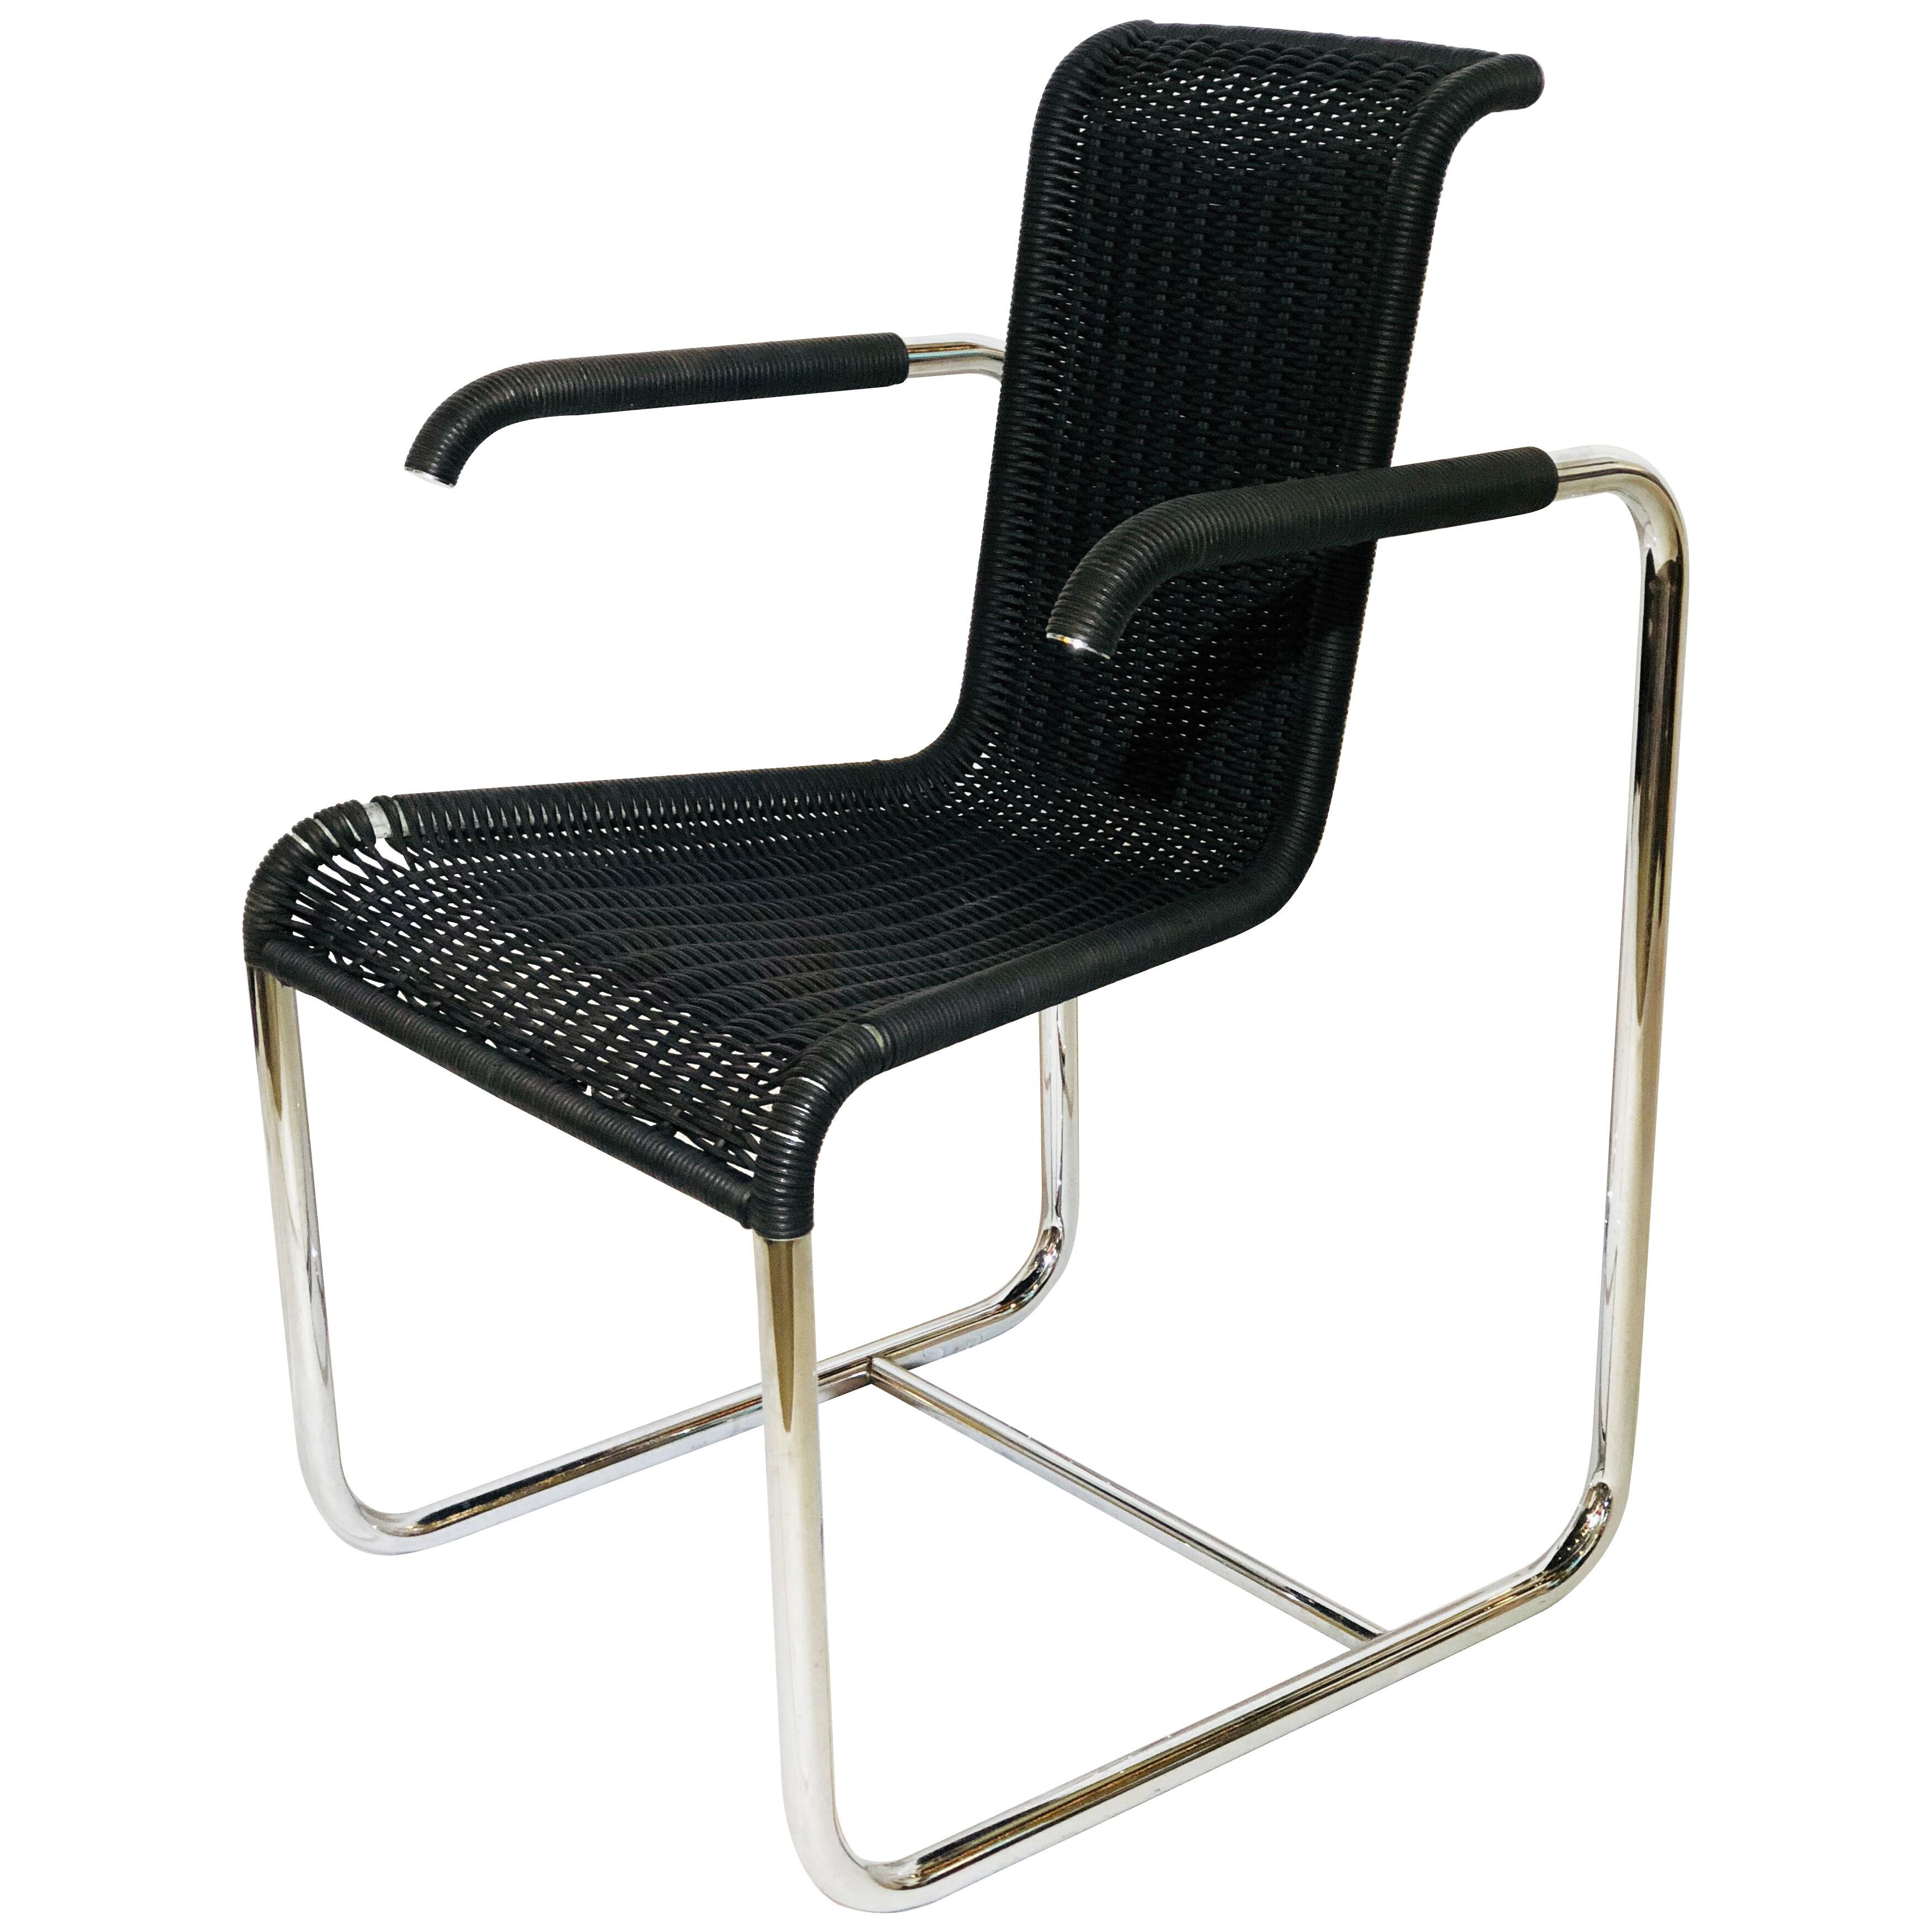 Jean Prouvé D20 Stainless Steel Leather Wicker Chair for Tecta, Germany, 1980s